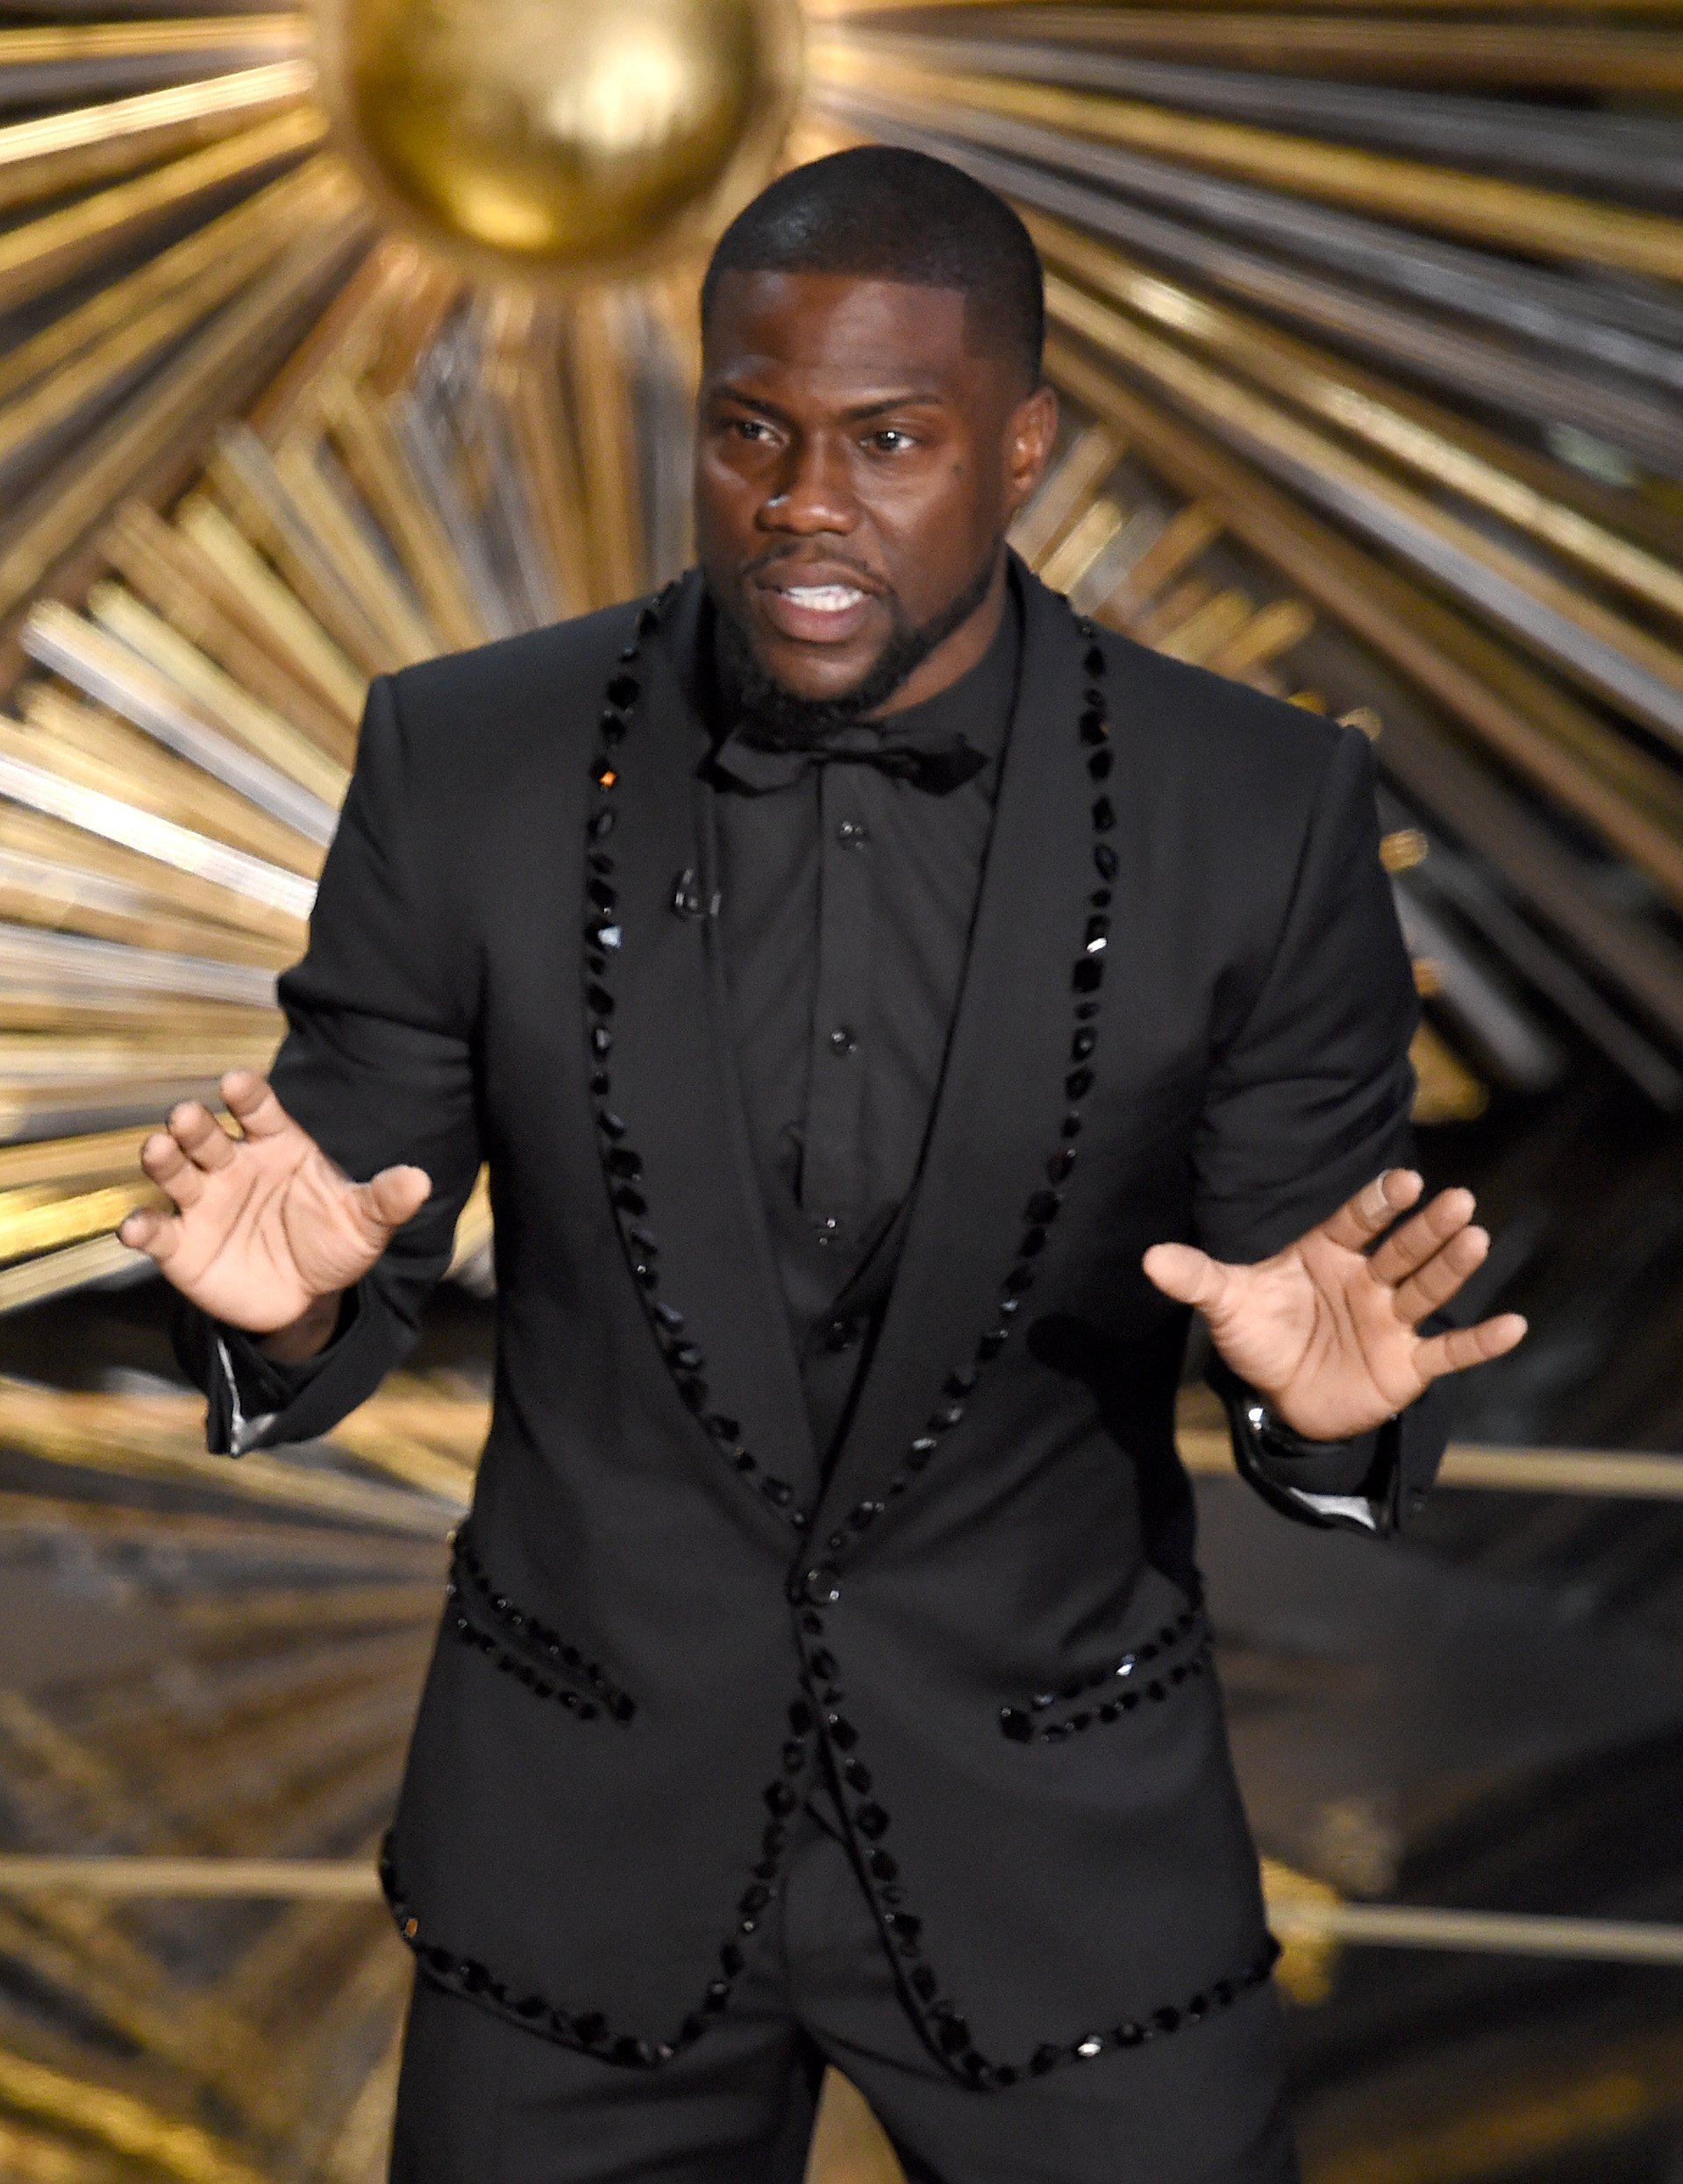 Kevin Hart at the 88th Annual Academy Awards on Feb. 28, 2016 in California | Photo: Getty Images